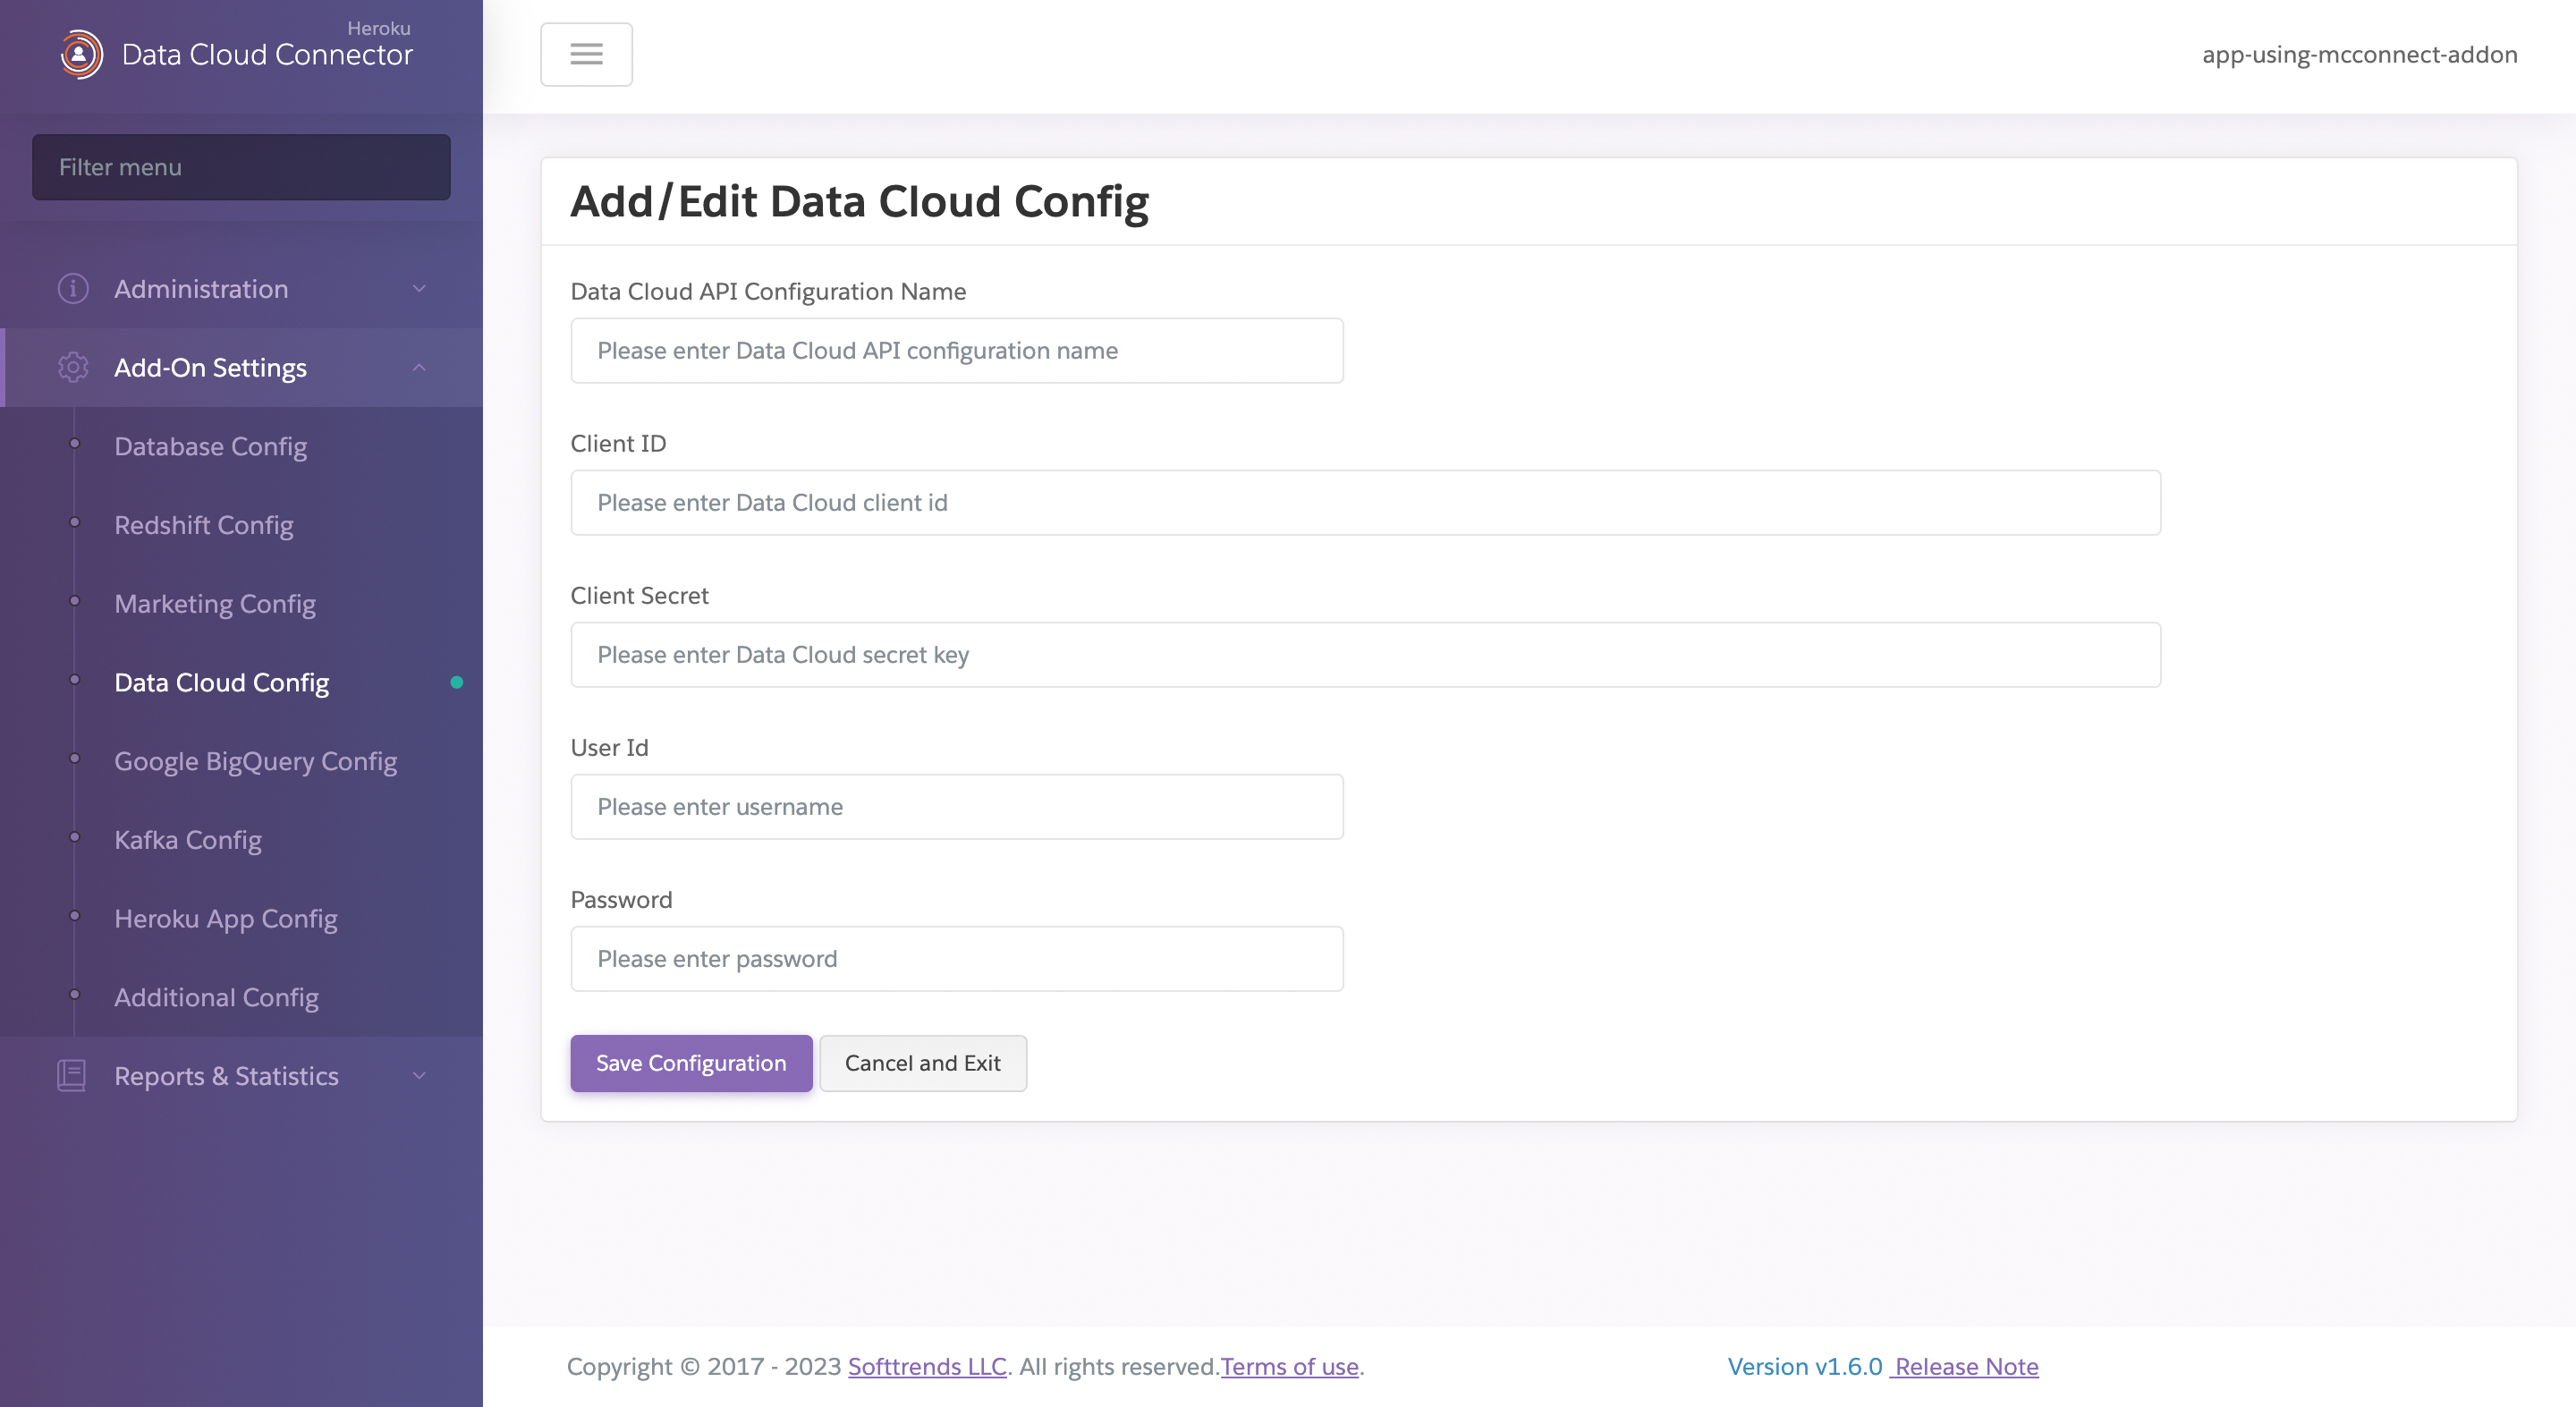 A screenshot of the Data Cloud configuration page showing the relevant fields for Data Cloud API Configuration.